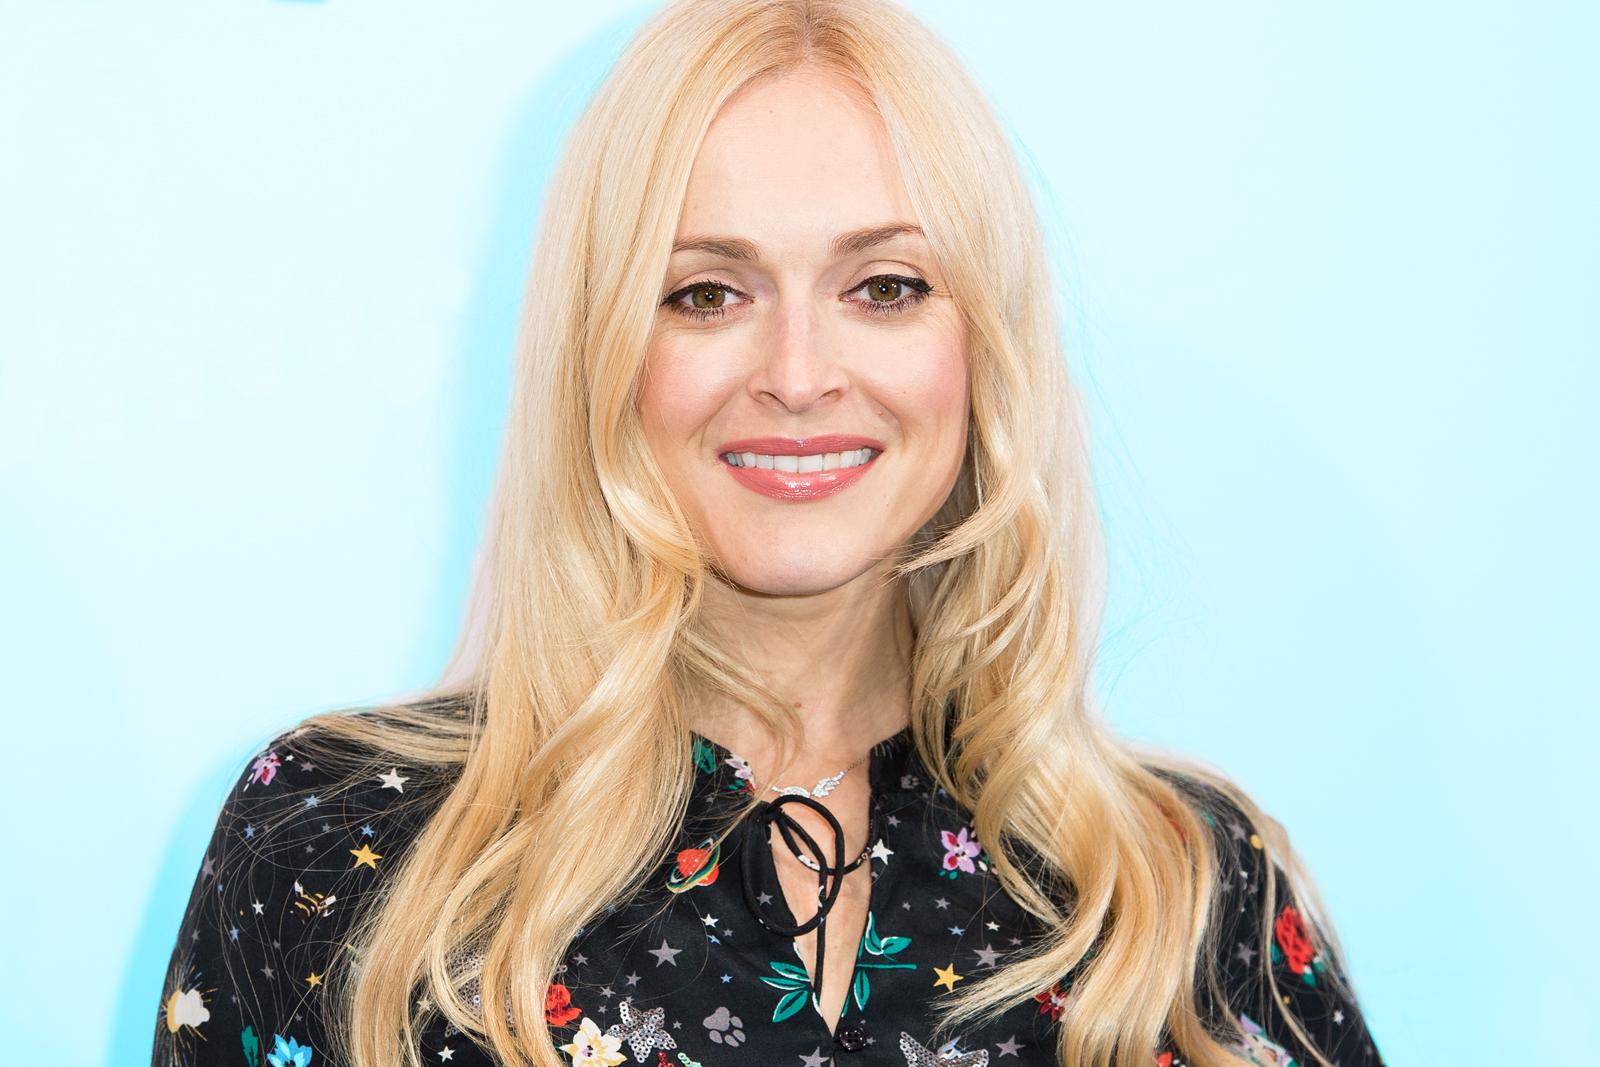 Fearne Cotton gets real about night-time anxiety, and her comments are so relatable